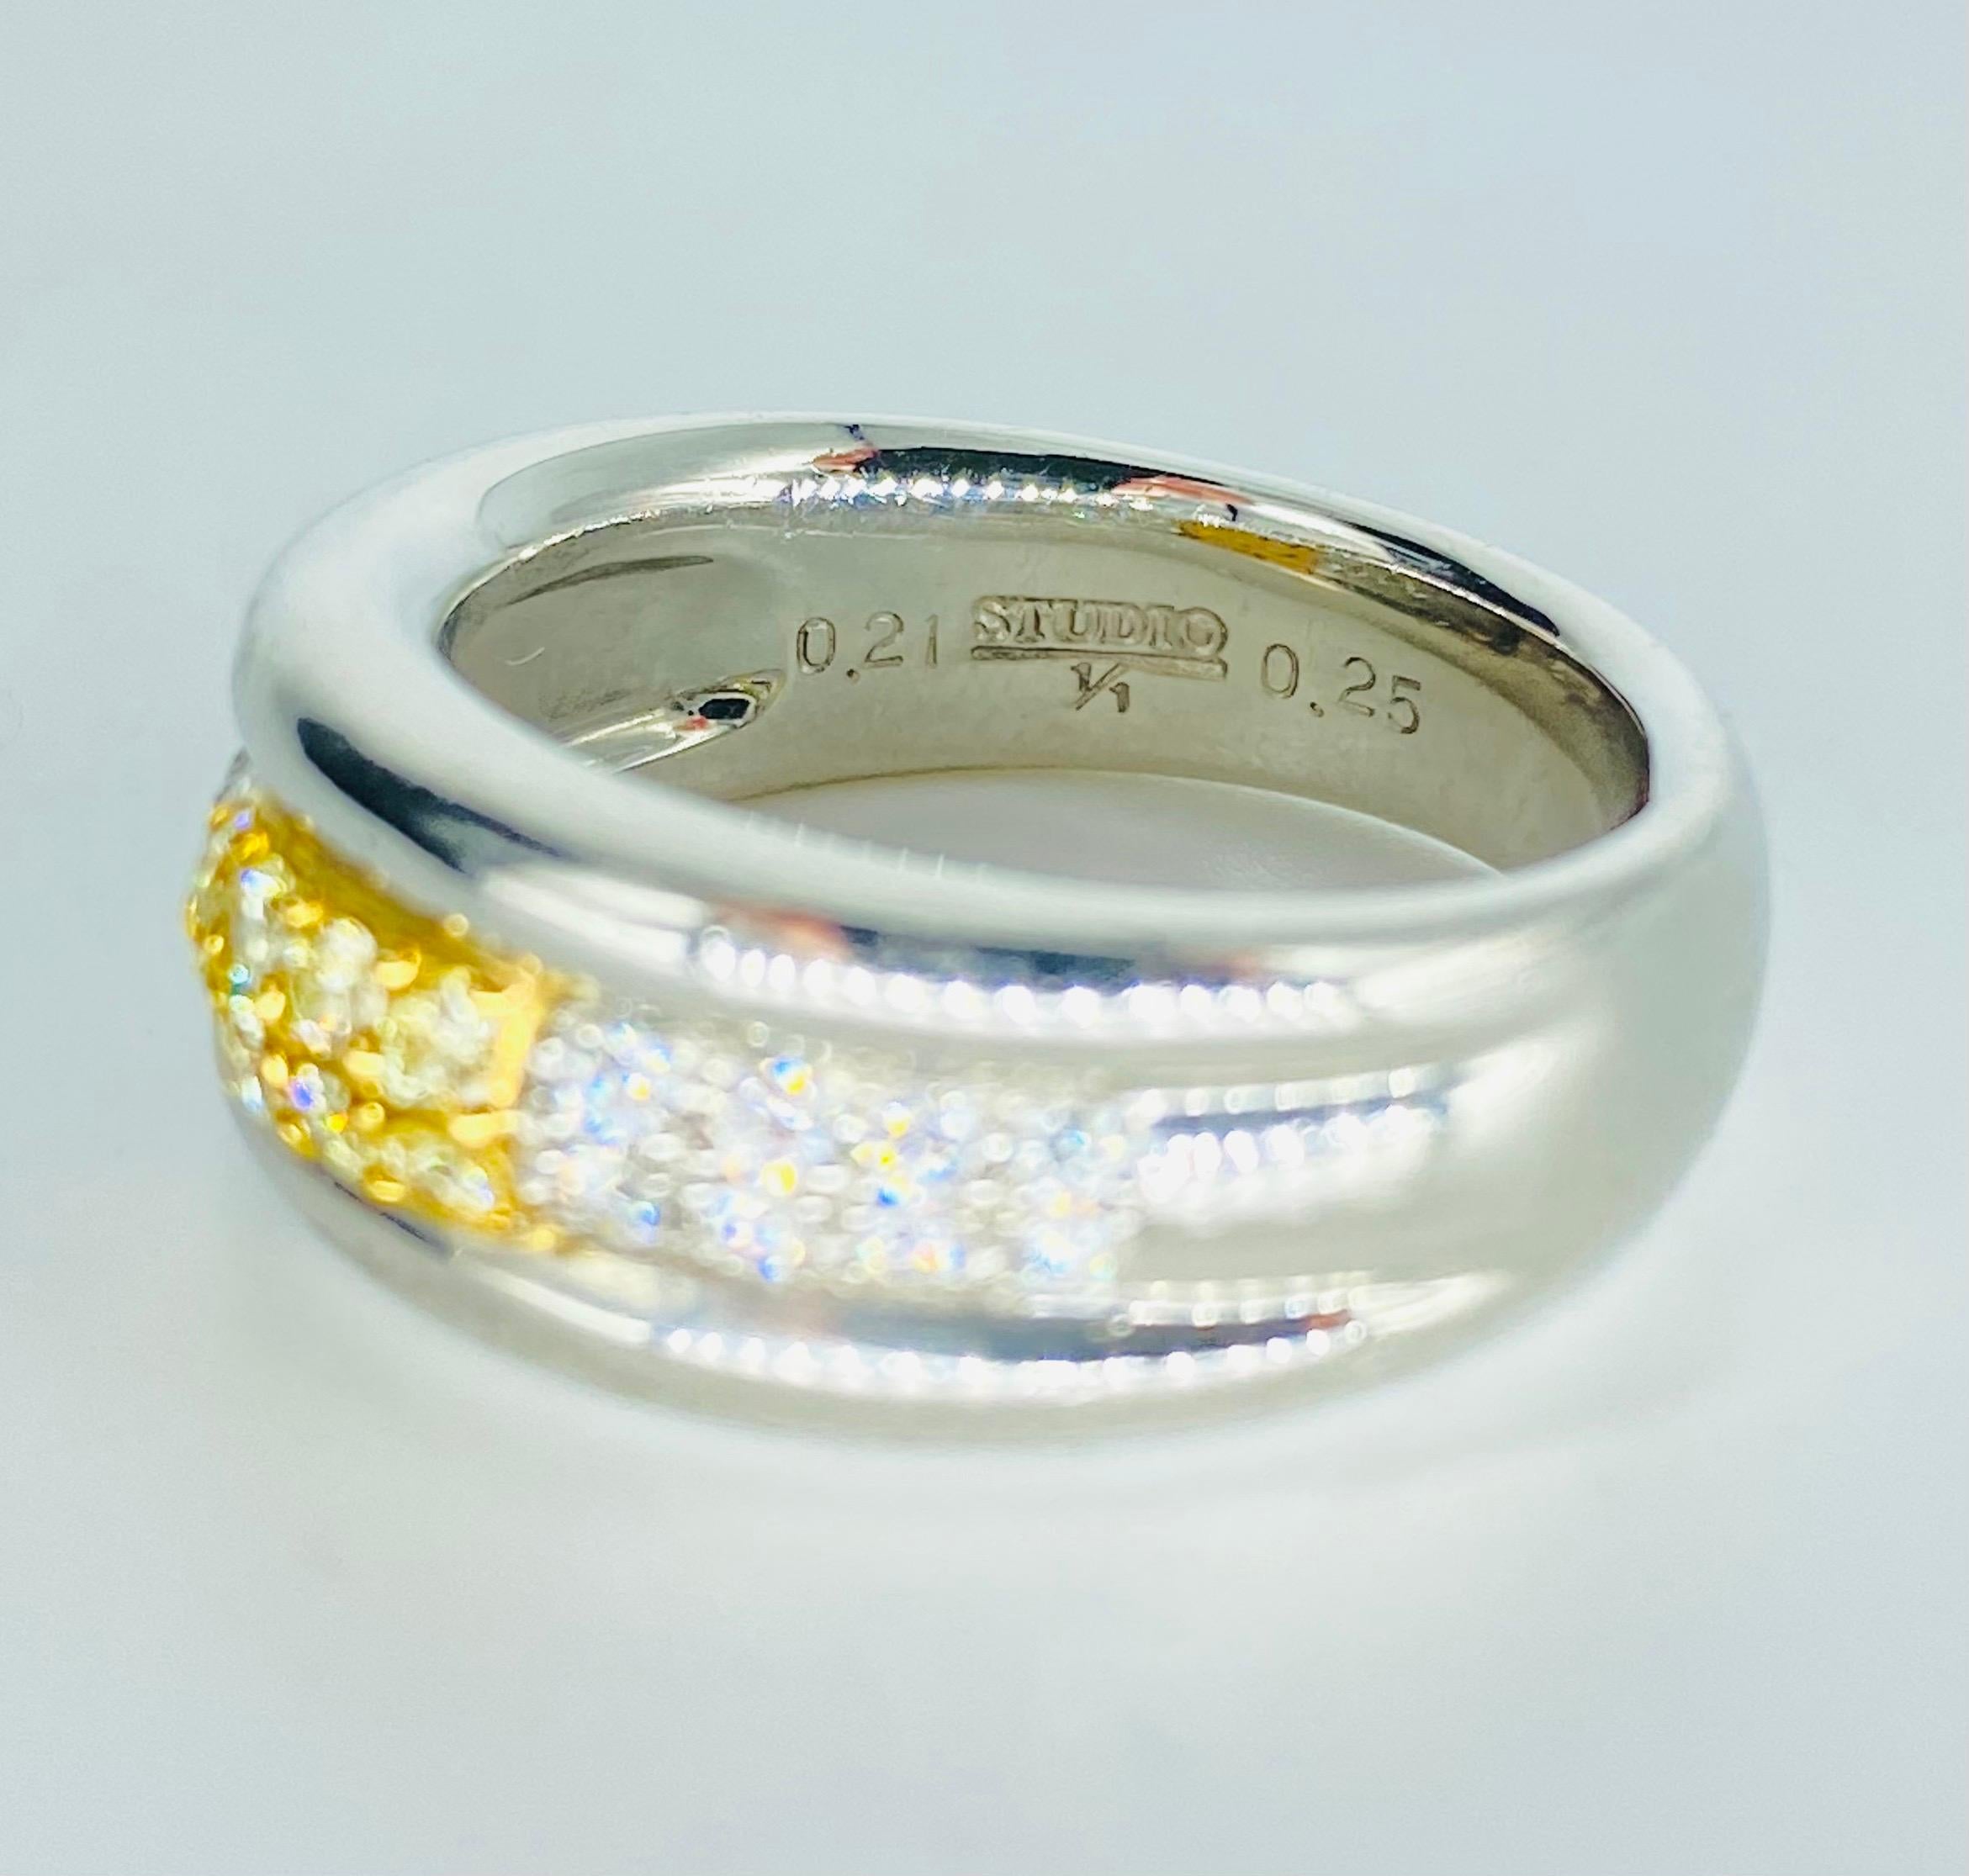 Studio 0.46 Carat Yellow & White Diamonds Platinum/18k Yellow Gold Band Ring In Excellent Condition For Sale In Miami, FL